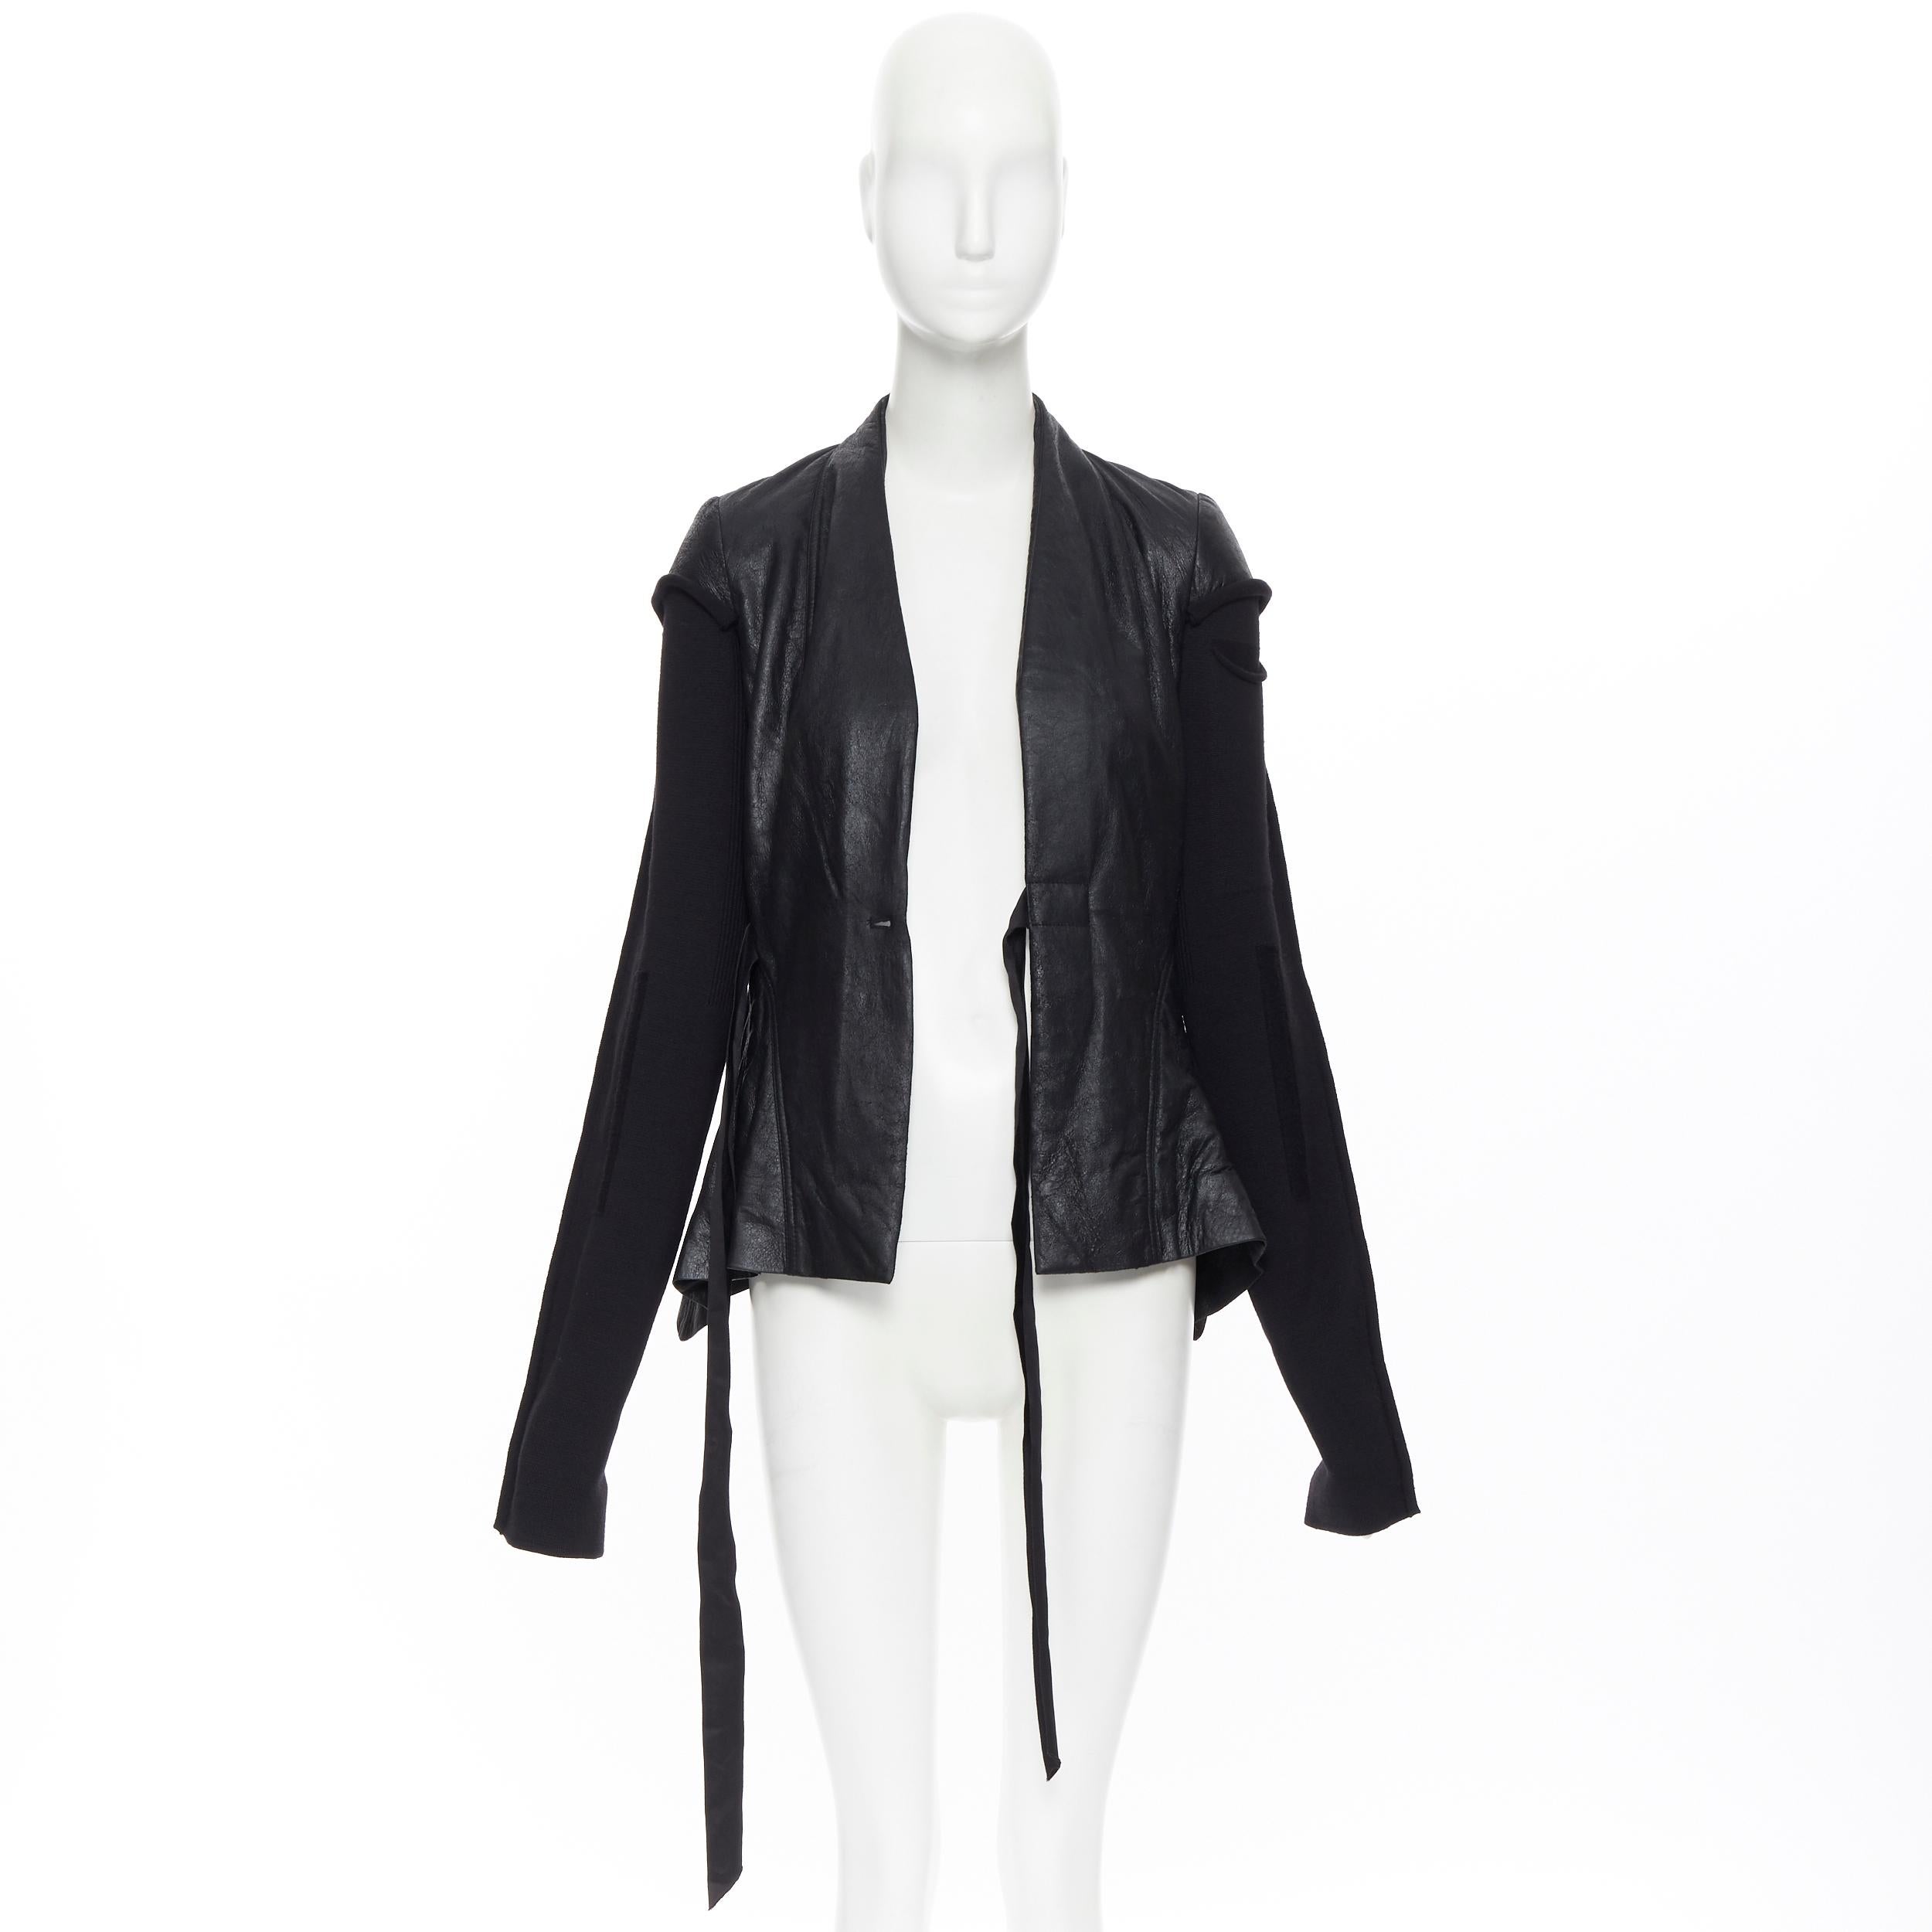 new RICK OWENS AW18 Wrap Princess deconstructed sleeves fitted leather jacket XS
Brand: Rick Owens
Designer: Rick Owens
Collection: AW18
Model Name / Style: Wrap Princess
Material: Leather, wool
Color: Black
Pattern: Solid
Closure: Tie
Extra Detail: